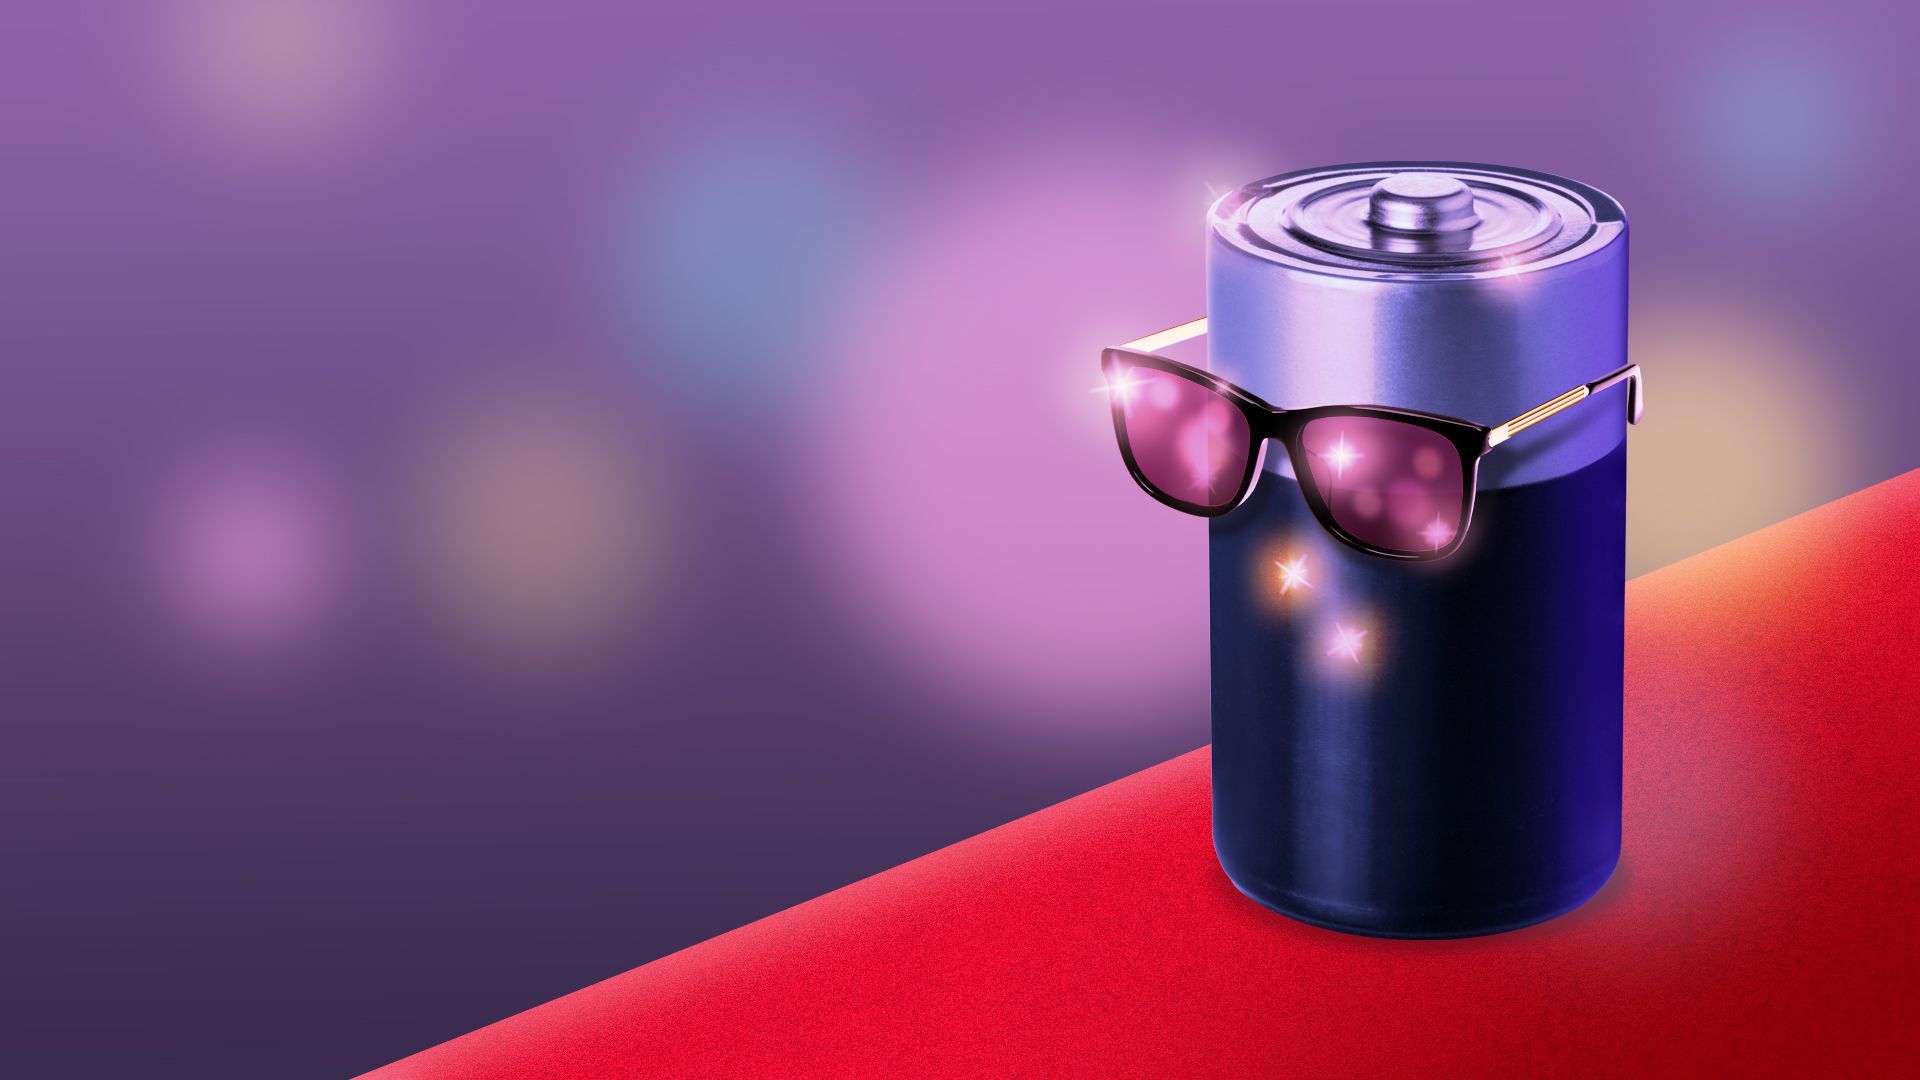 Illustration of a battery in sunglasses on a red carpet surrounded by camera flashes